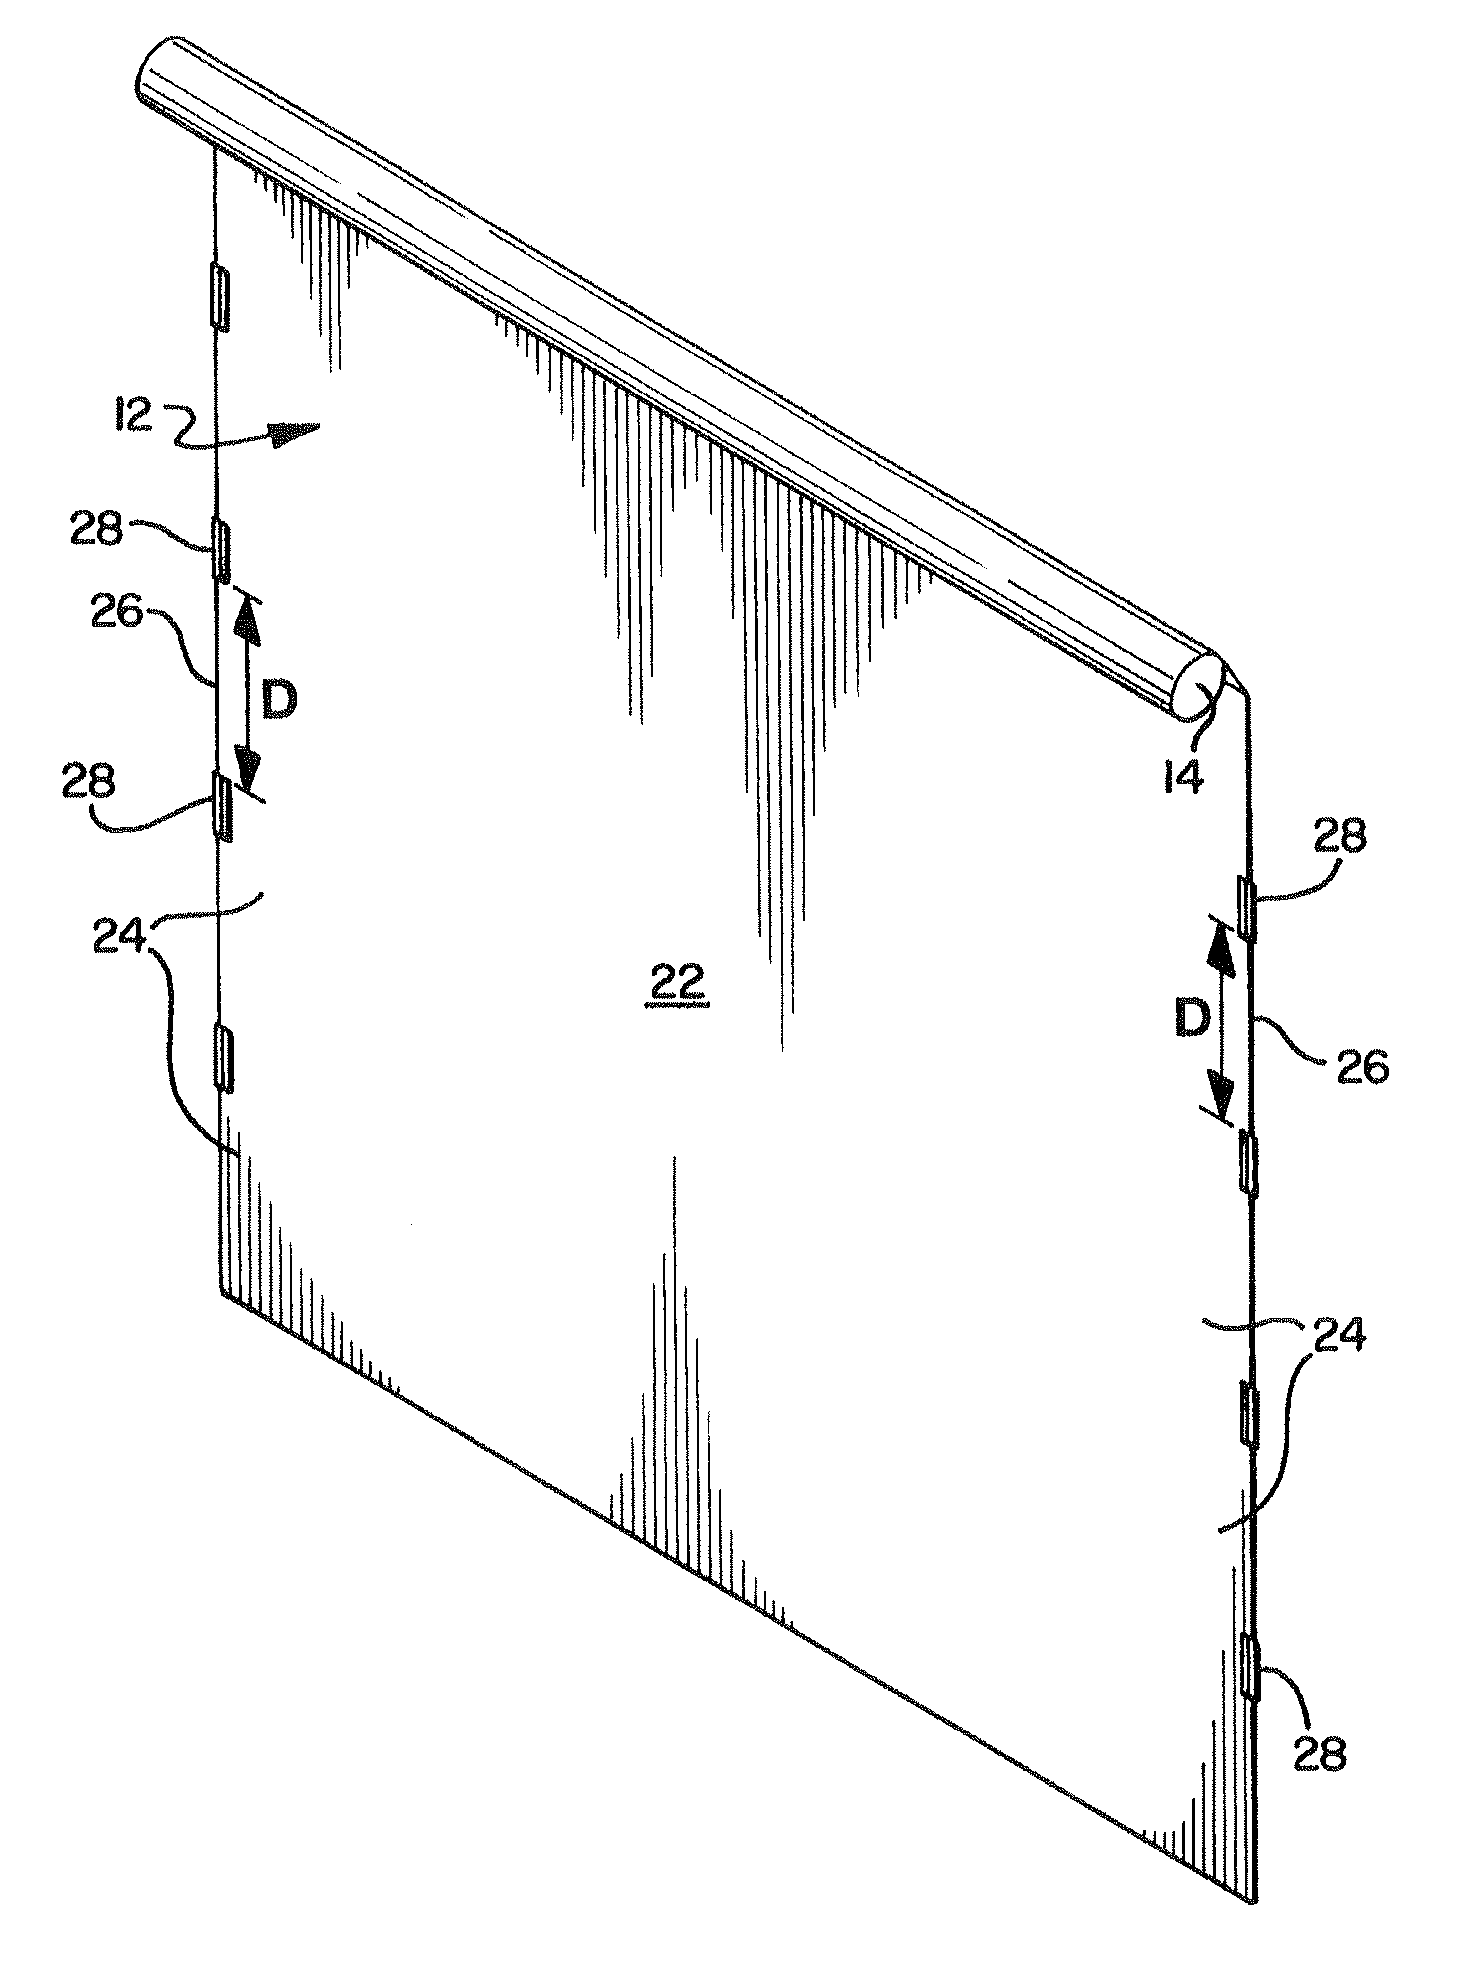 Segmented wind lock configuration for overhead roll-up doors and method of constructing the same